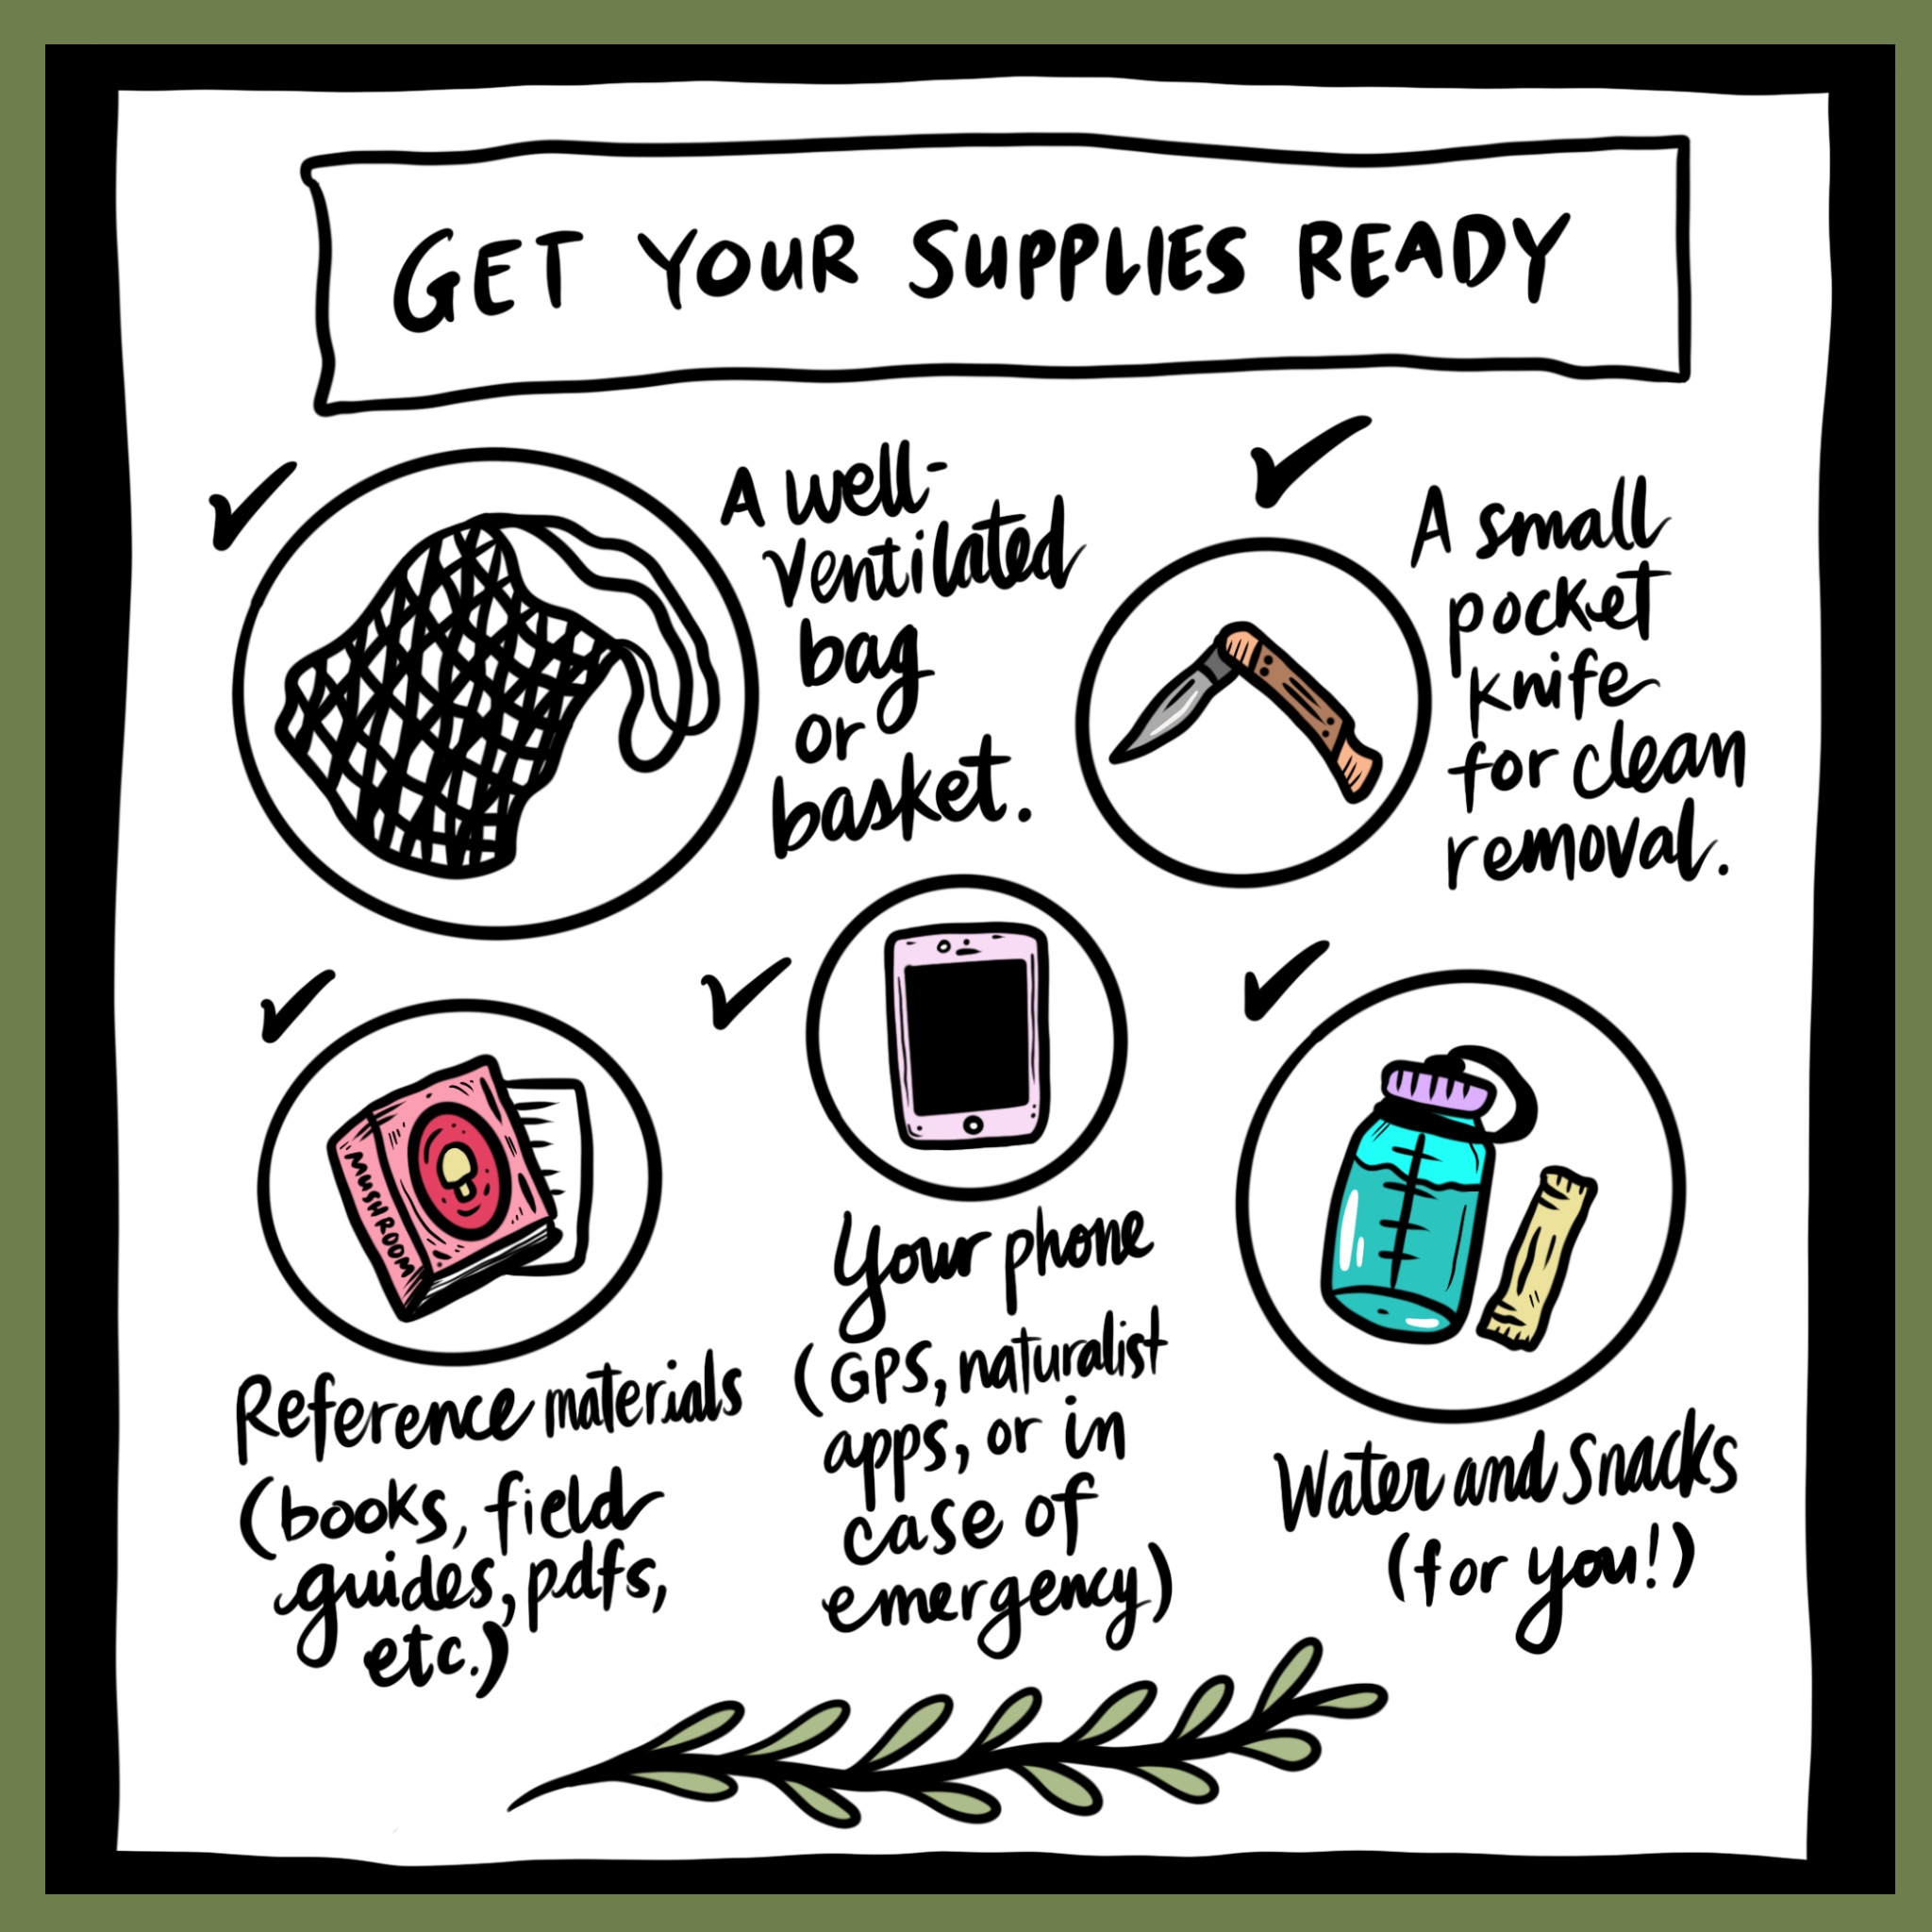 Get your supplies ready. A well ventilated bag or basket. A small pocket knife for clean removal. Reference materials (books, field guides, pdfs, etc.). Your phone (GPS, naturalist apps, or in case of emergency). Water and snacks (for you!).